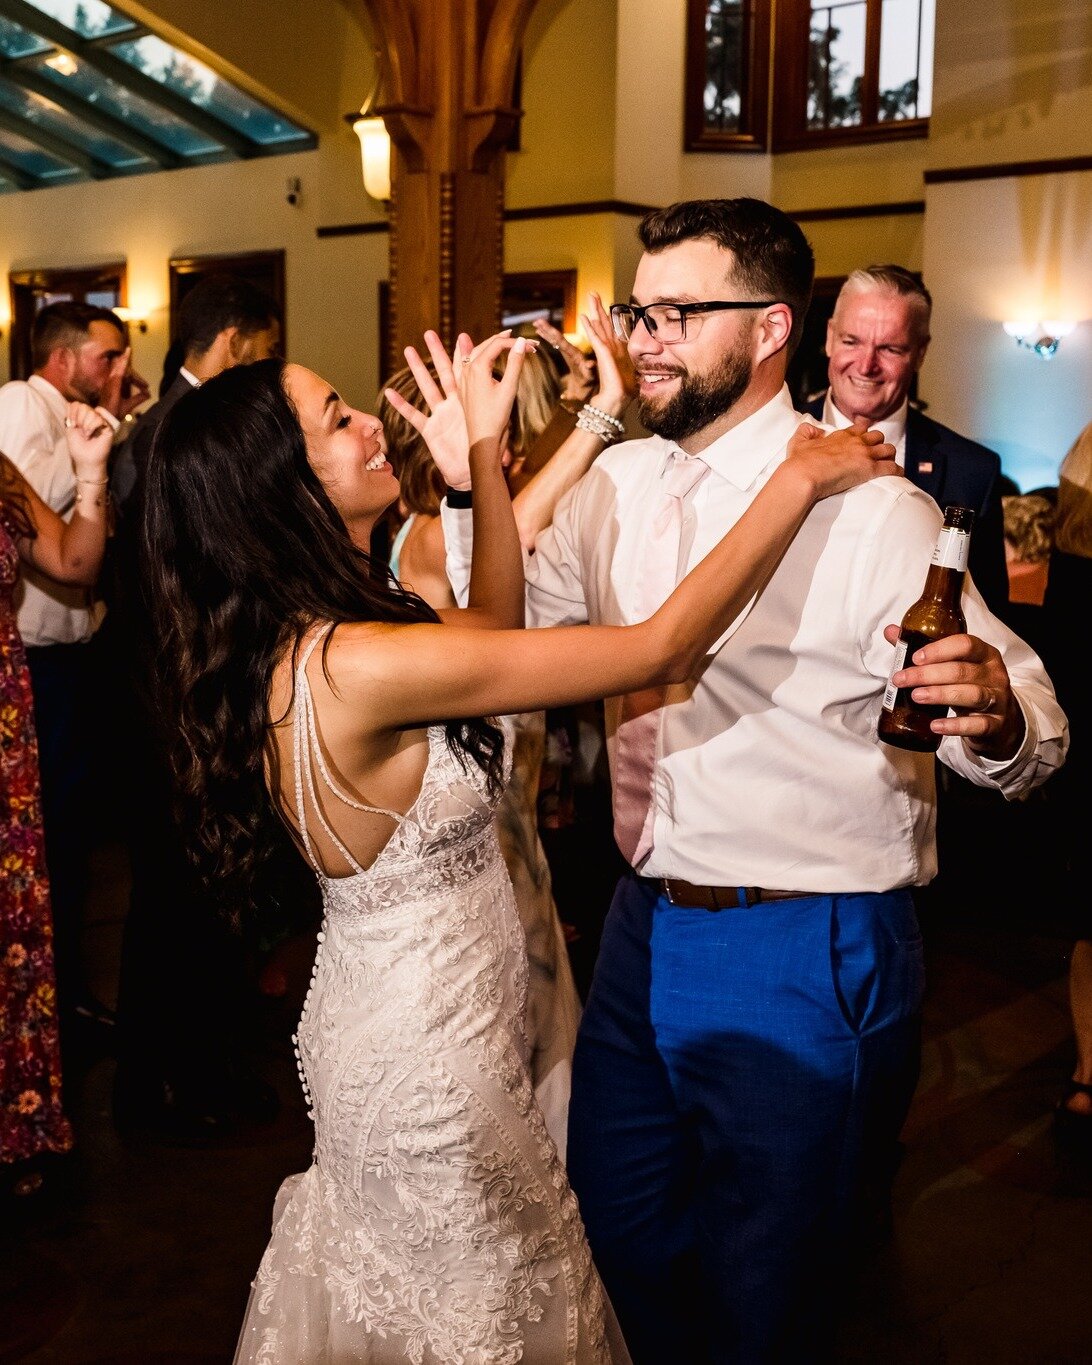 When the music hits and the love is real - authentic moments happen 🙌

Couple @caitlinmary21 @spatrickscannell
Venue at Knowlton Mansion
Caterer @conroycatering
Photos by @soultstudios
Music By @djjaymurch @jordoprod @onthebeatfx

#phillybrides #phi